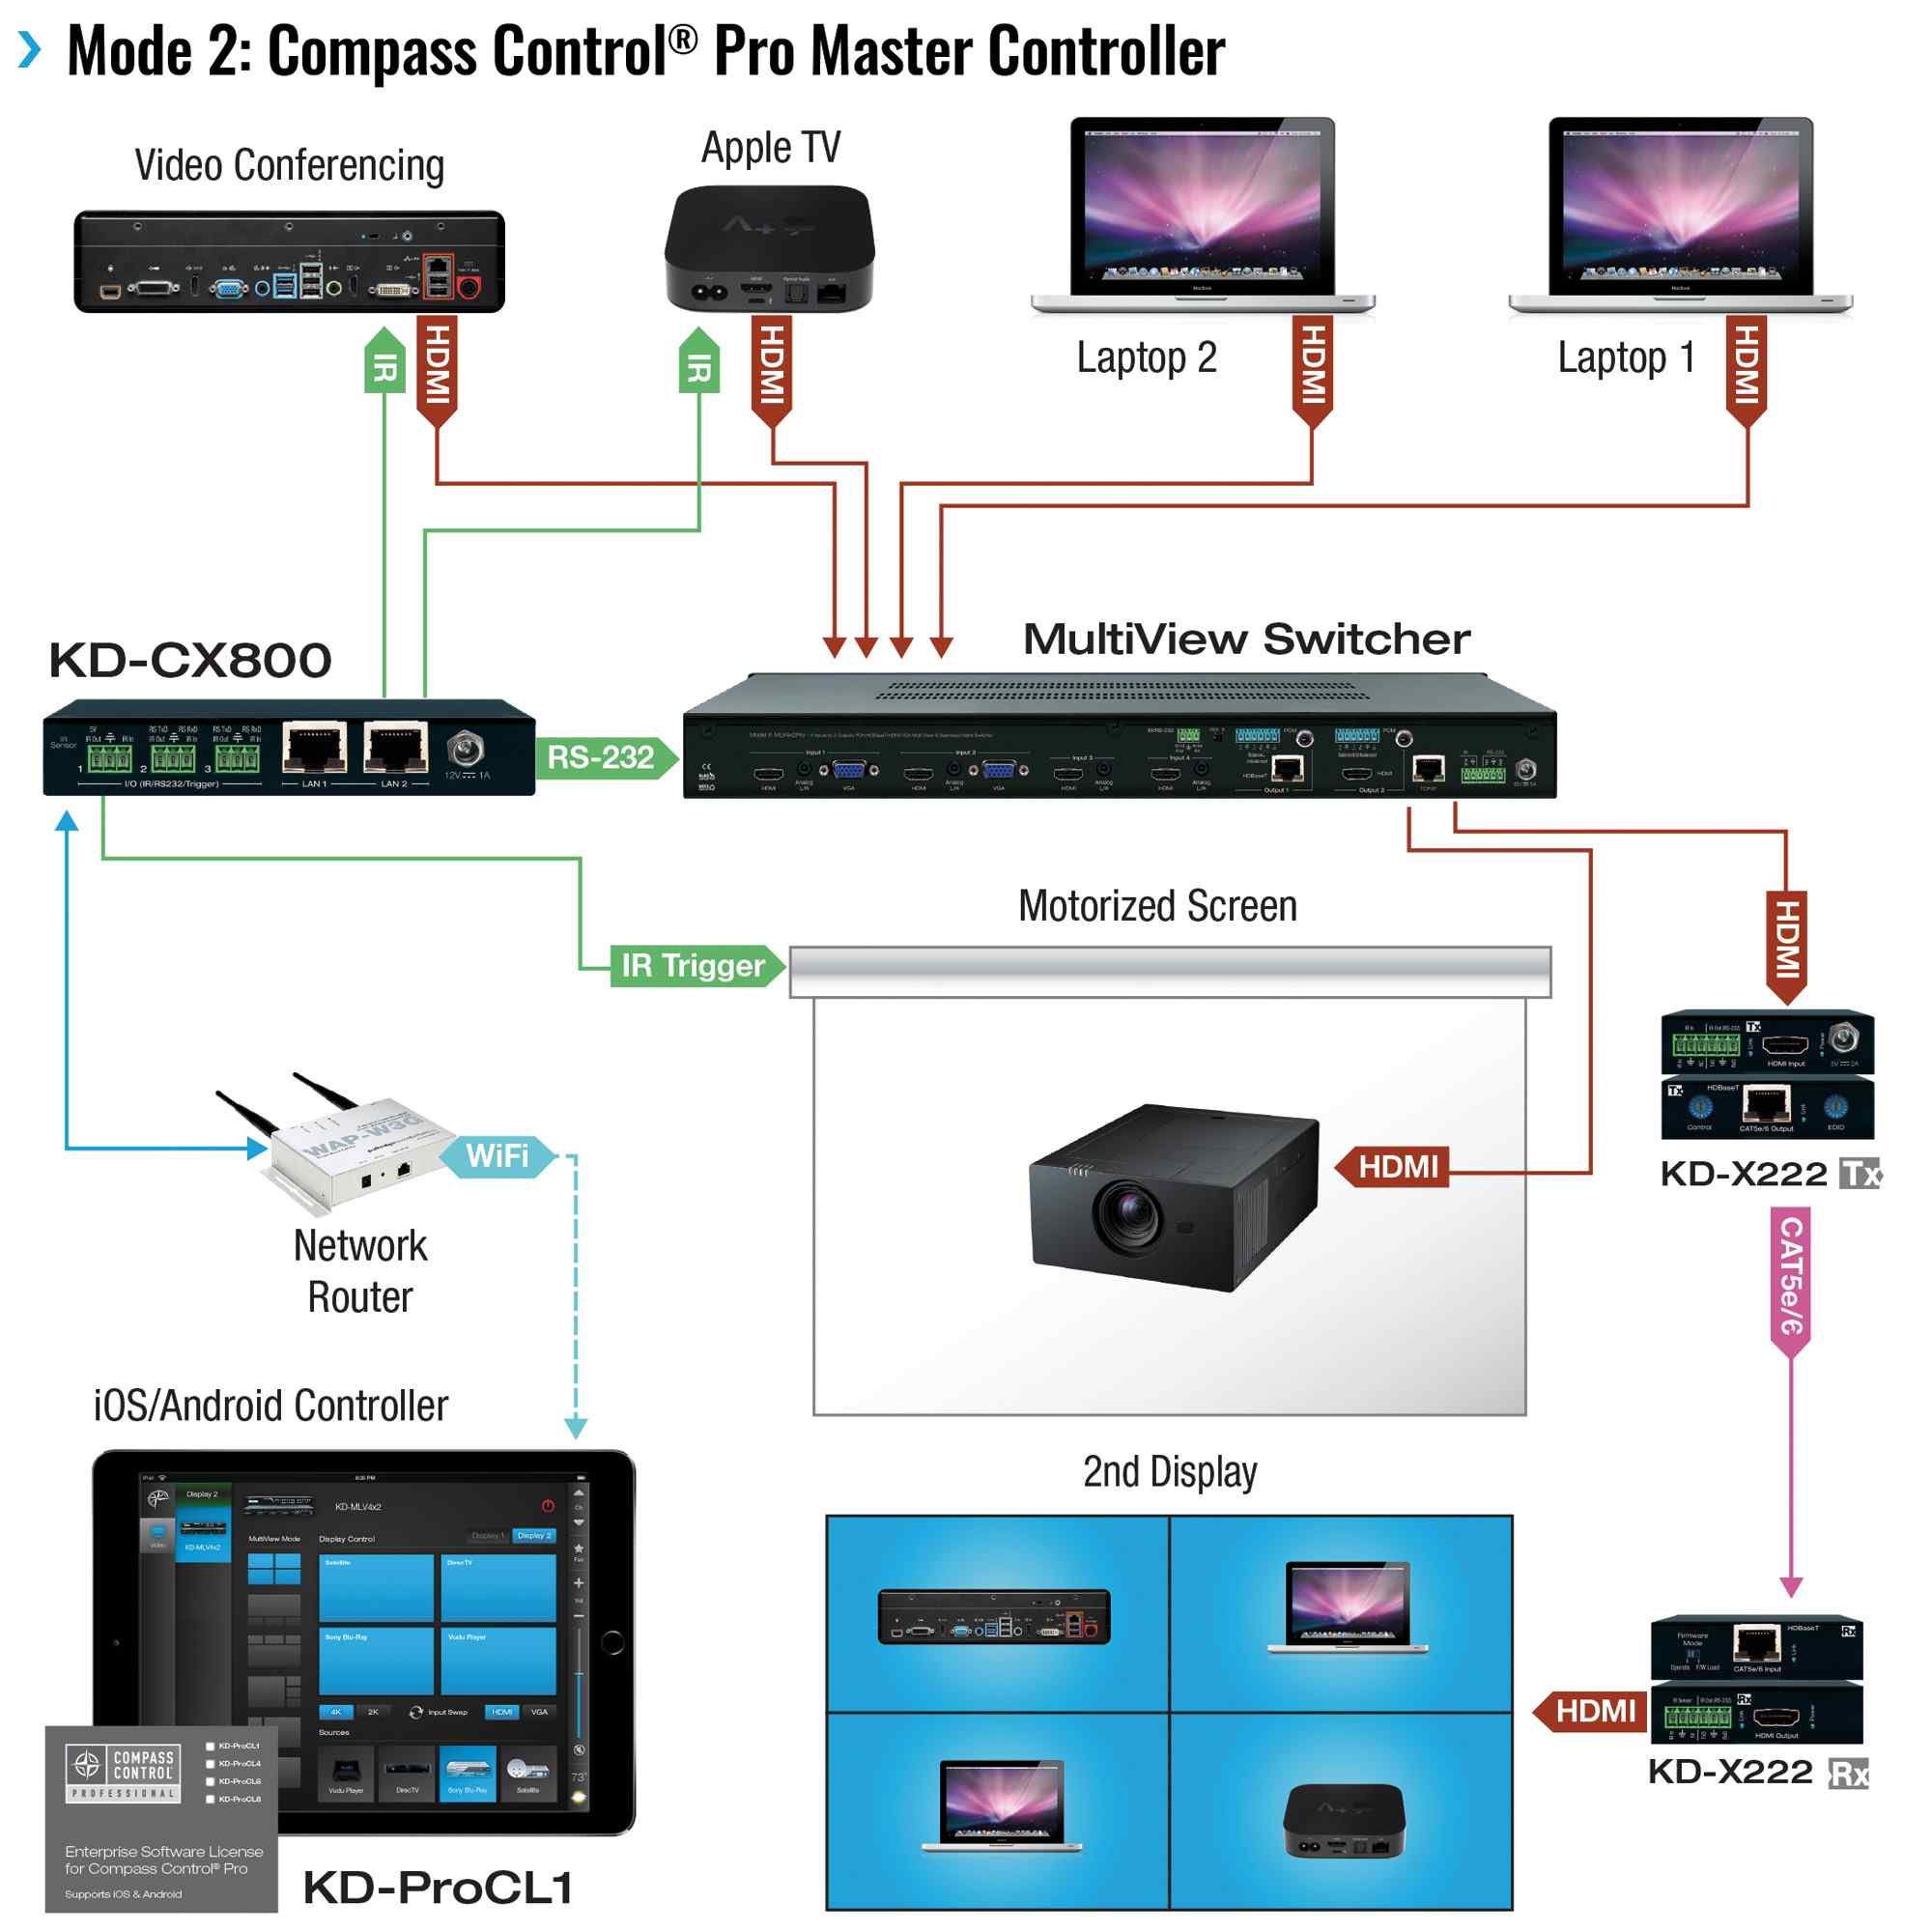 Thumbnail of Example Diagram showing the pro master controller 